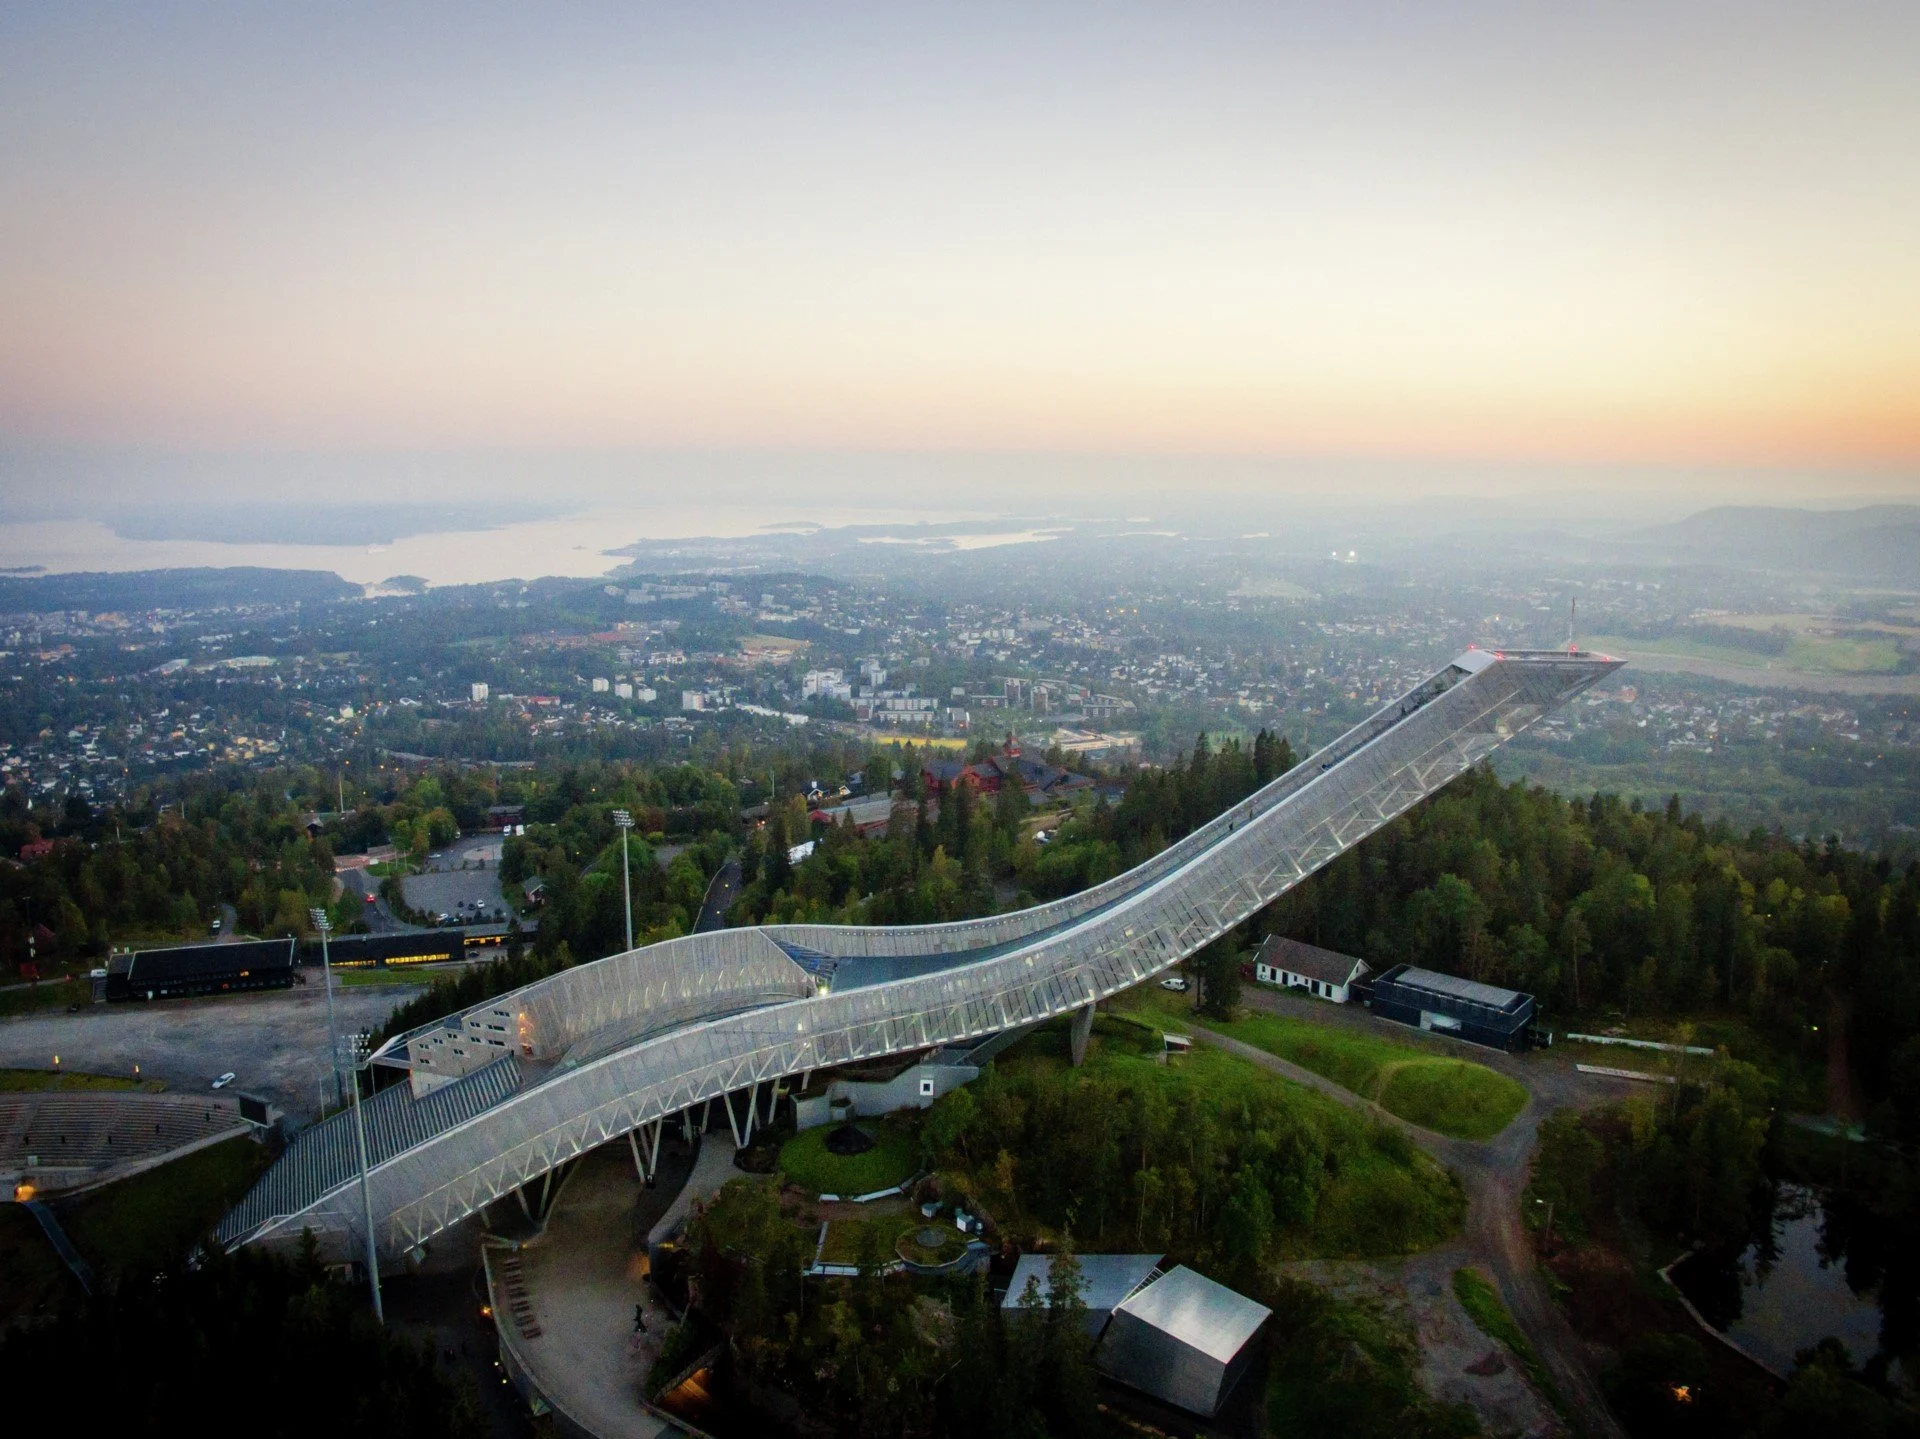 The Holmenkollen ski jump in with the Oslo skyline in the background, Norway.